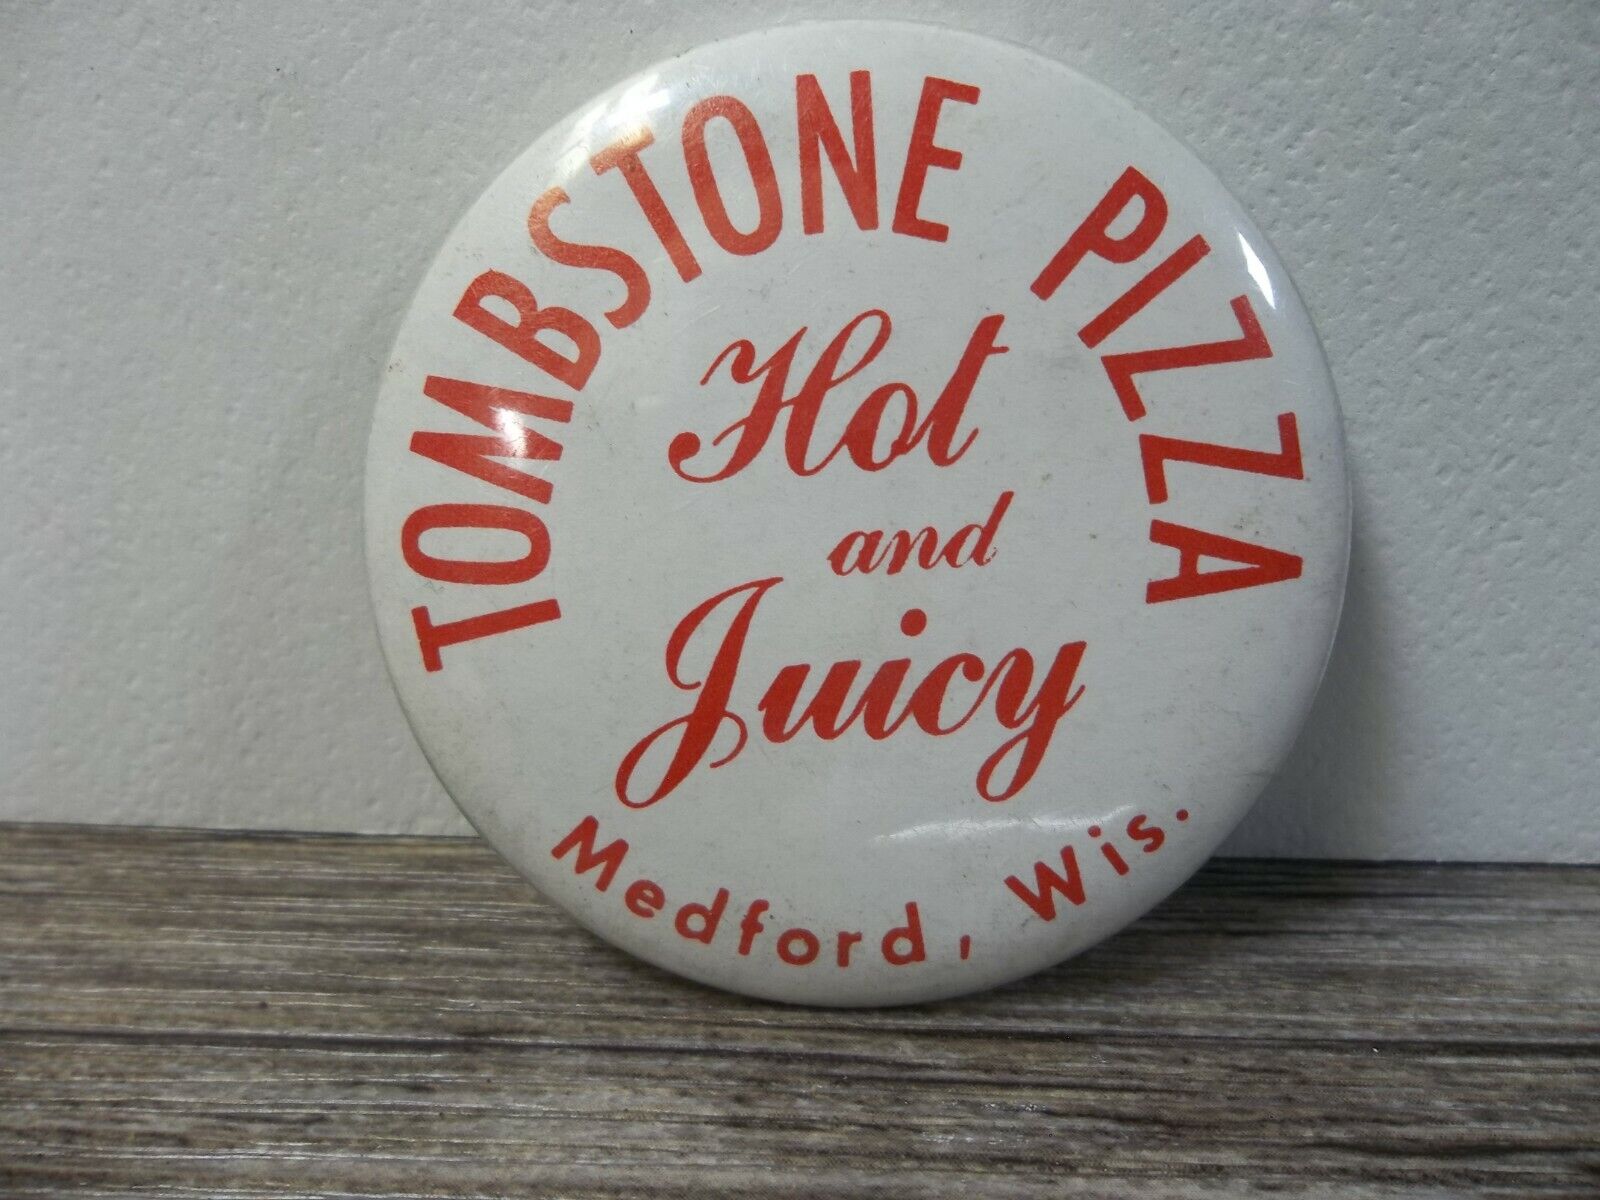 Tombstone Pizza Medford Wis. advertising pinback button hot and juicy       D6